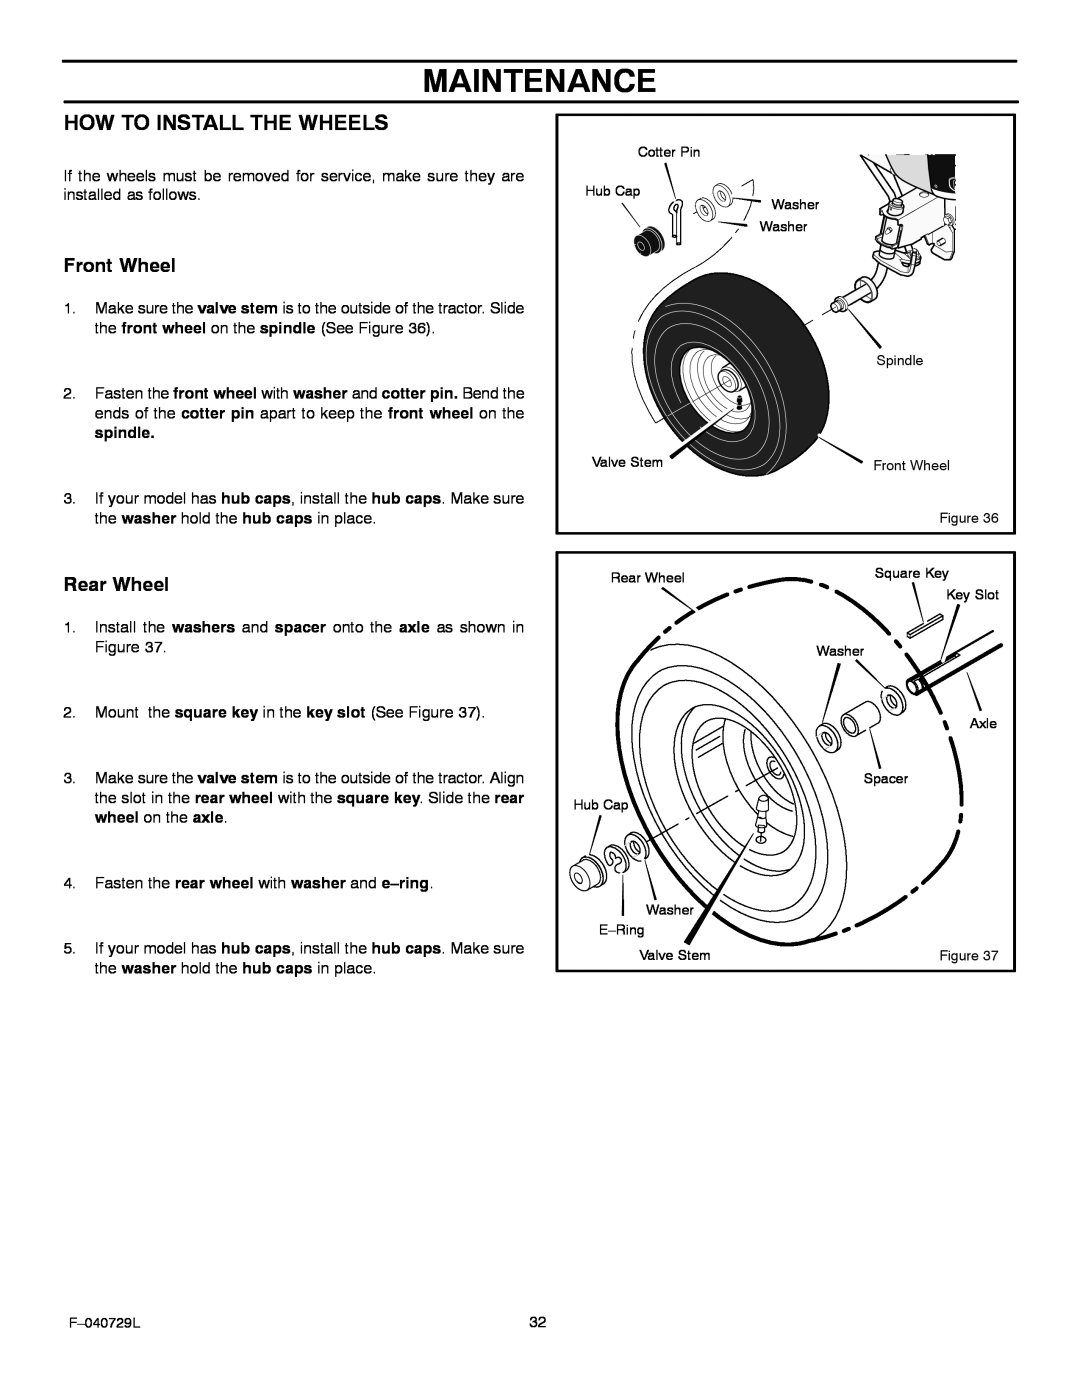 Murray 425620x92A manual Maintenance, How To Install The Wheels, Front Wheel, Rear Wheel 